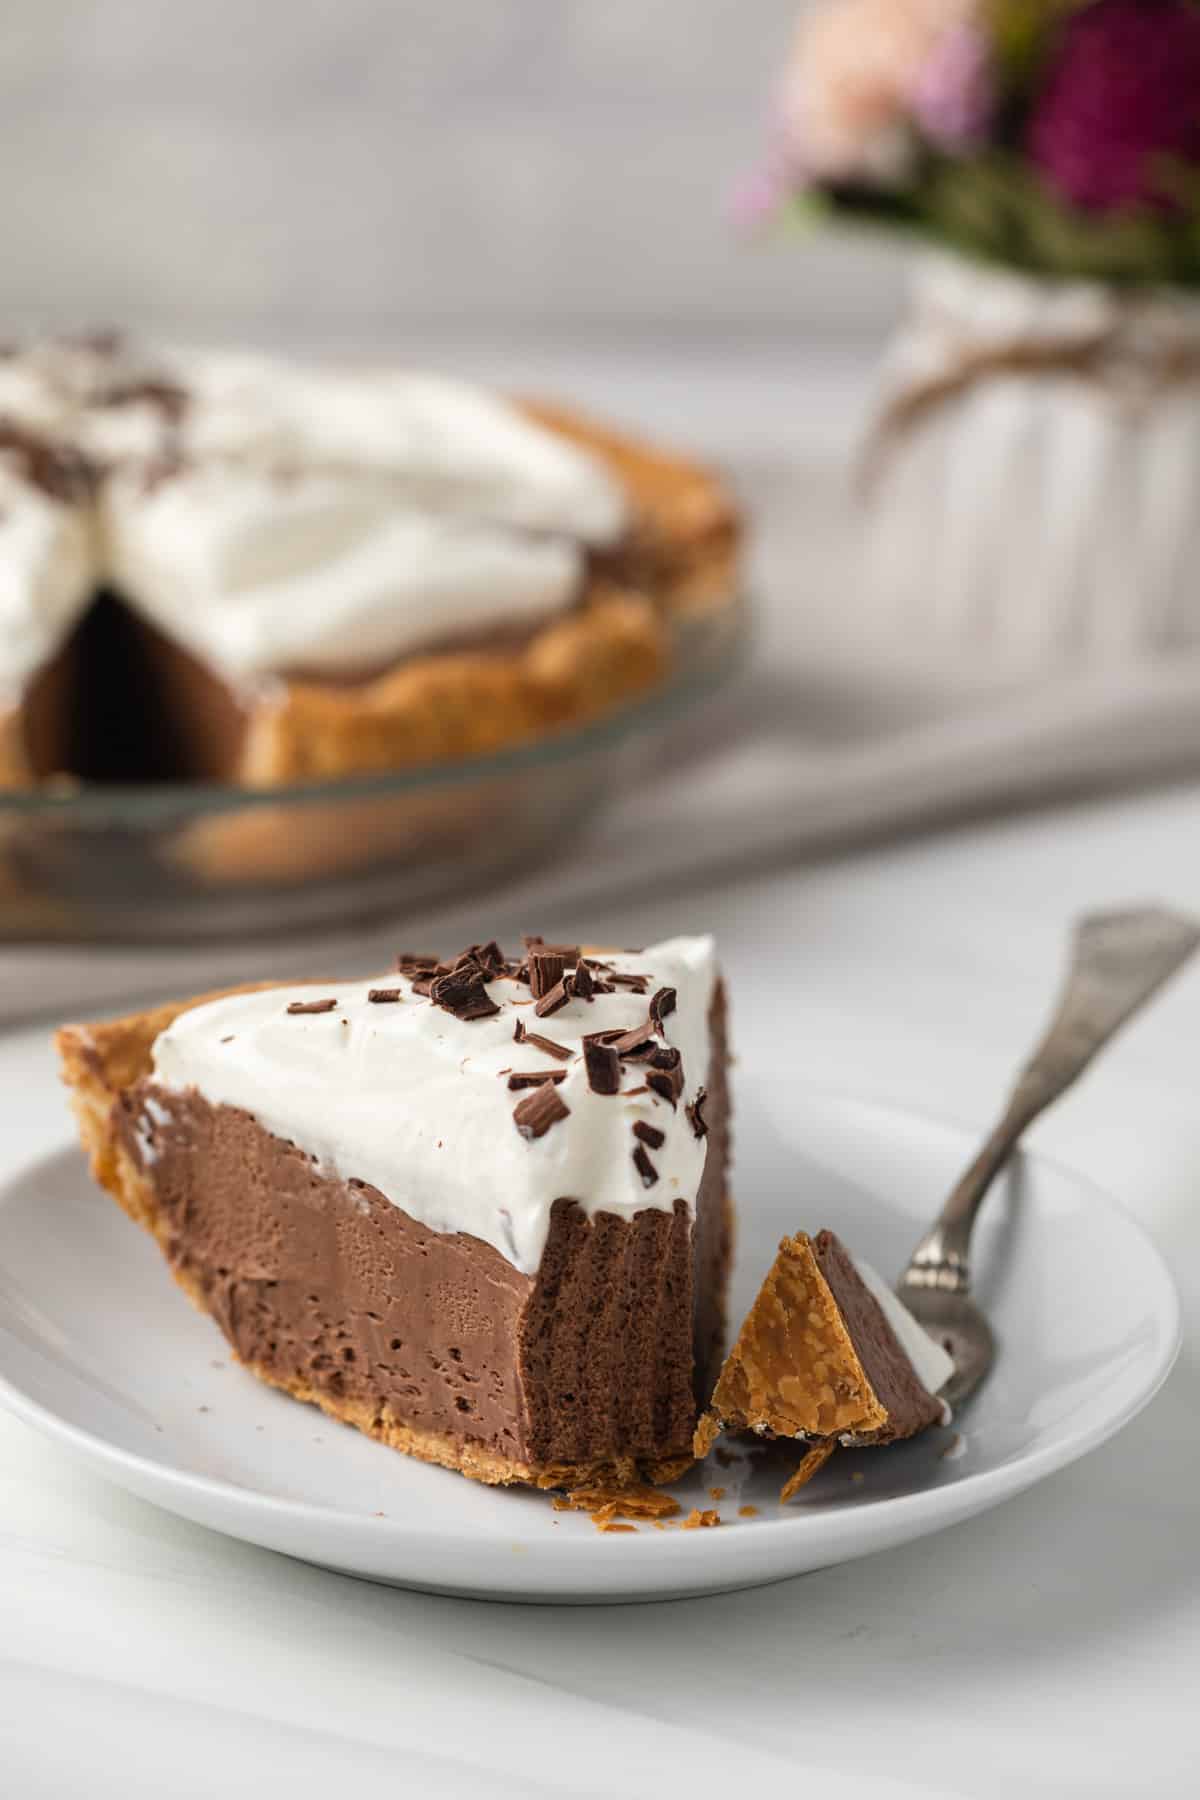 Slice of french silk pie with fork taking out a bite.